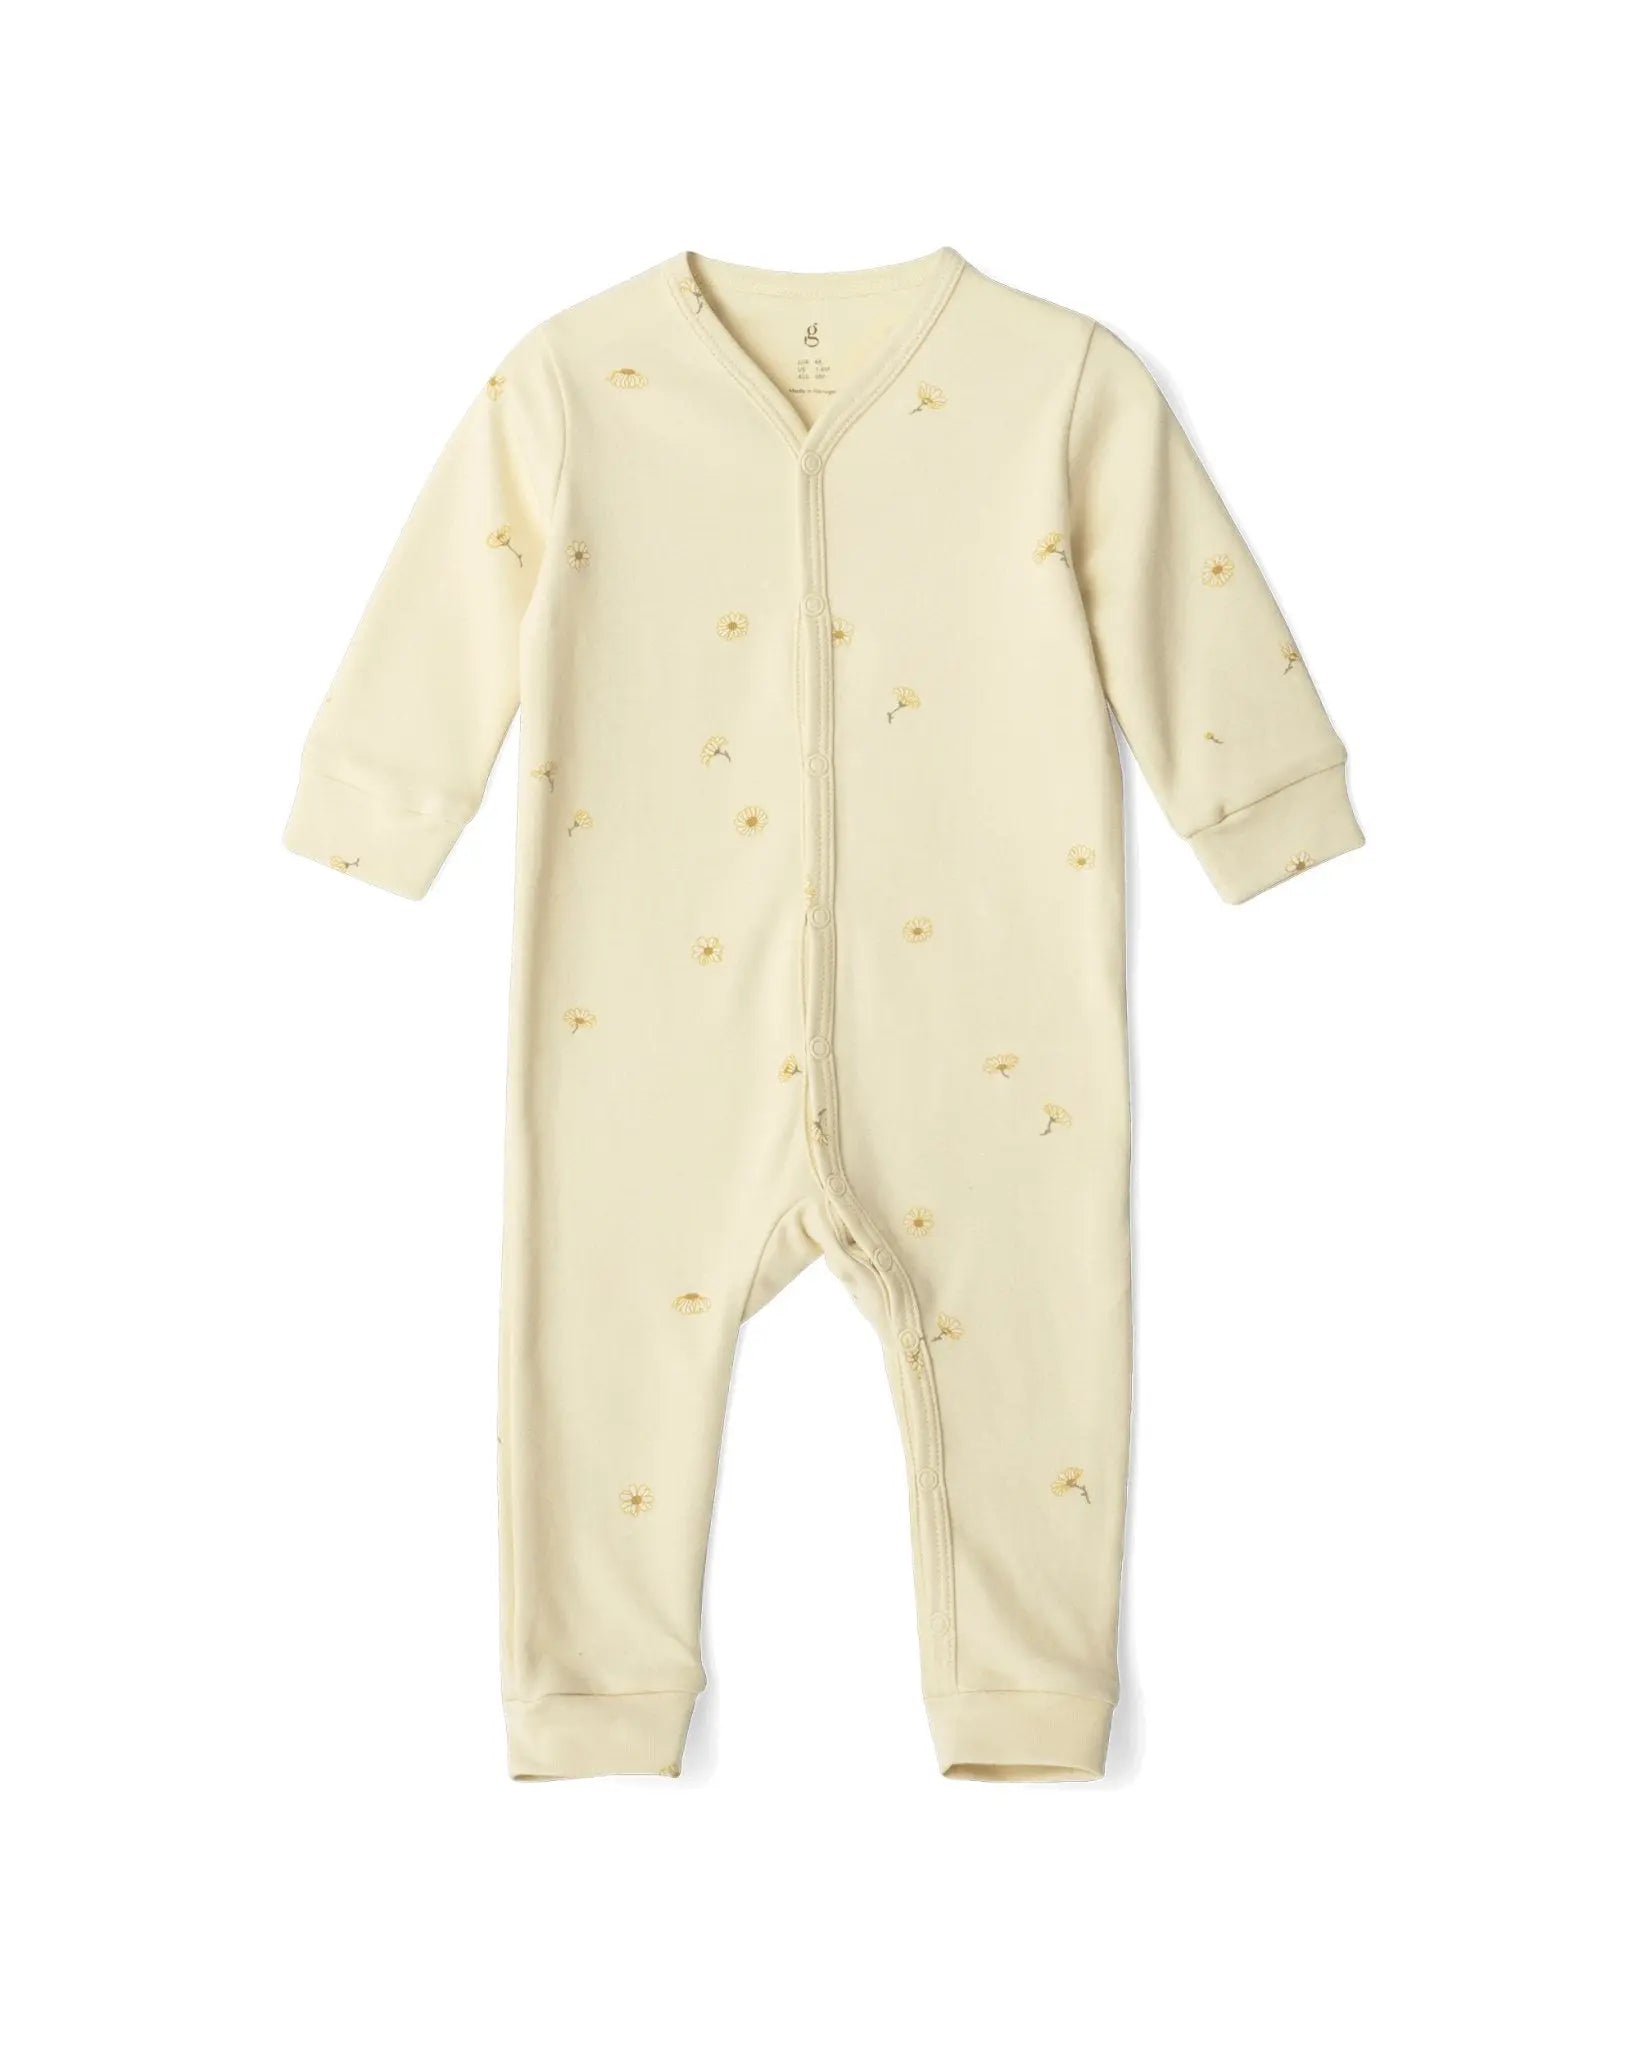 Jersey Pyjamas, Made in Portugal, Comfortable Pajama Set, OEKO-TEX® Certified  Garbo and Friends Daisy 74/80 (9-12M) 